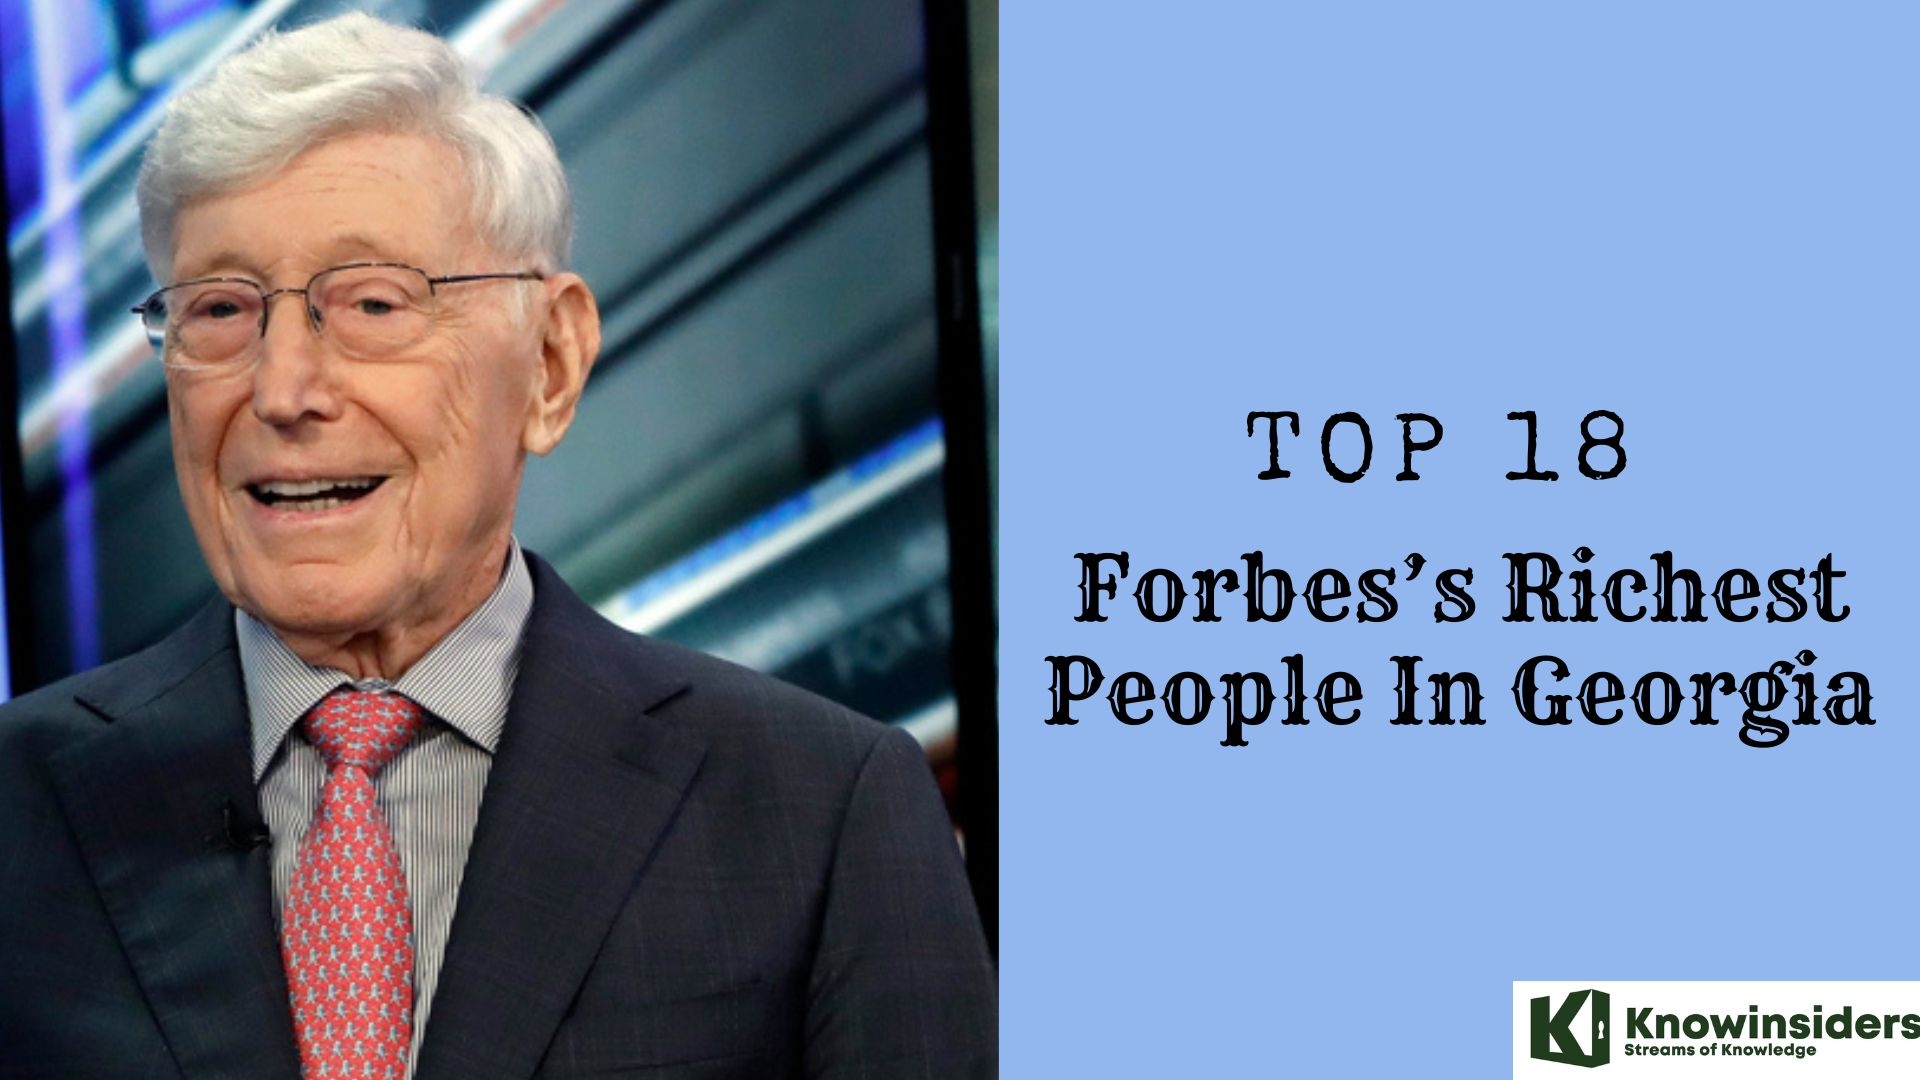 Top 18 Forbes’s Richest People In Georgia Knowinsiders.com 